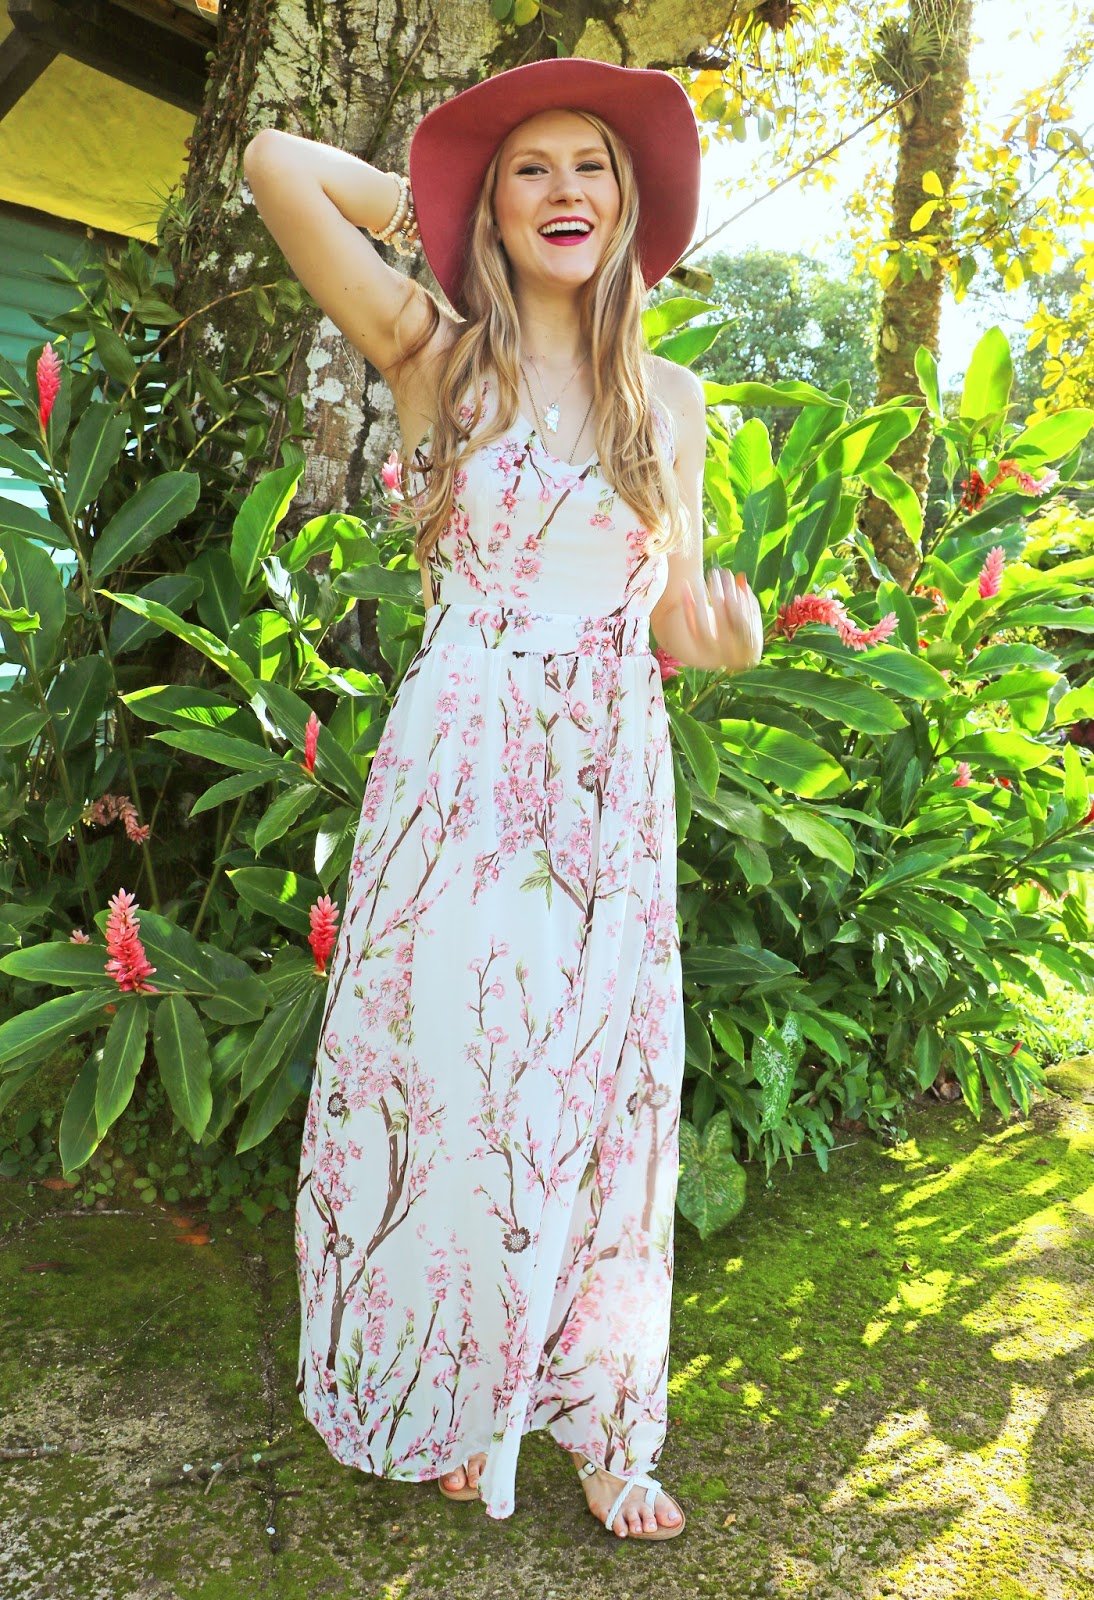 This floral dress is stunning and perfect for Spring